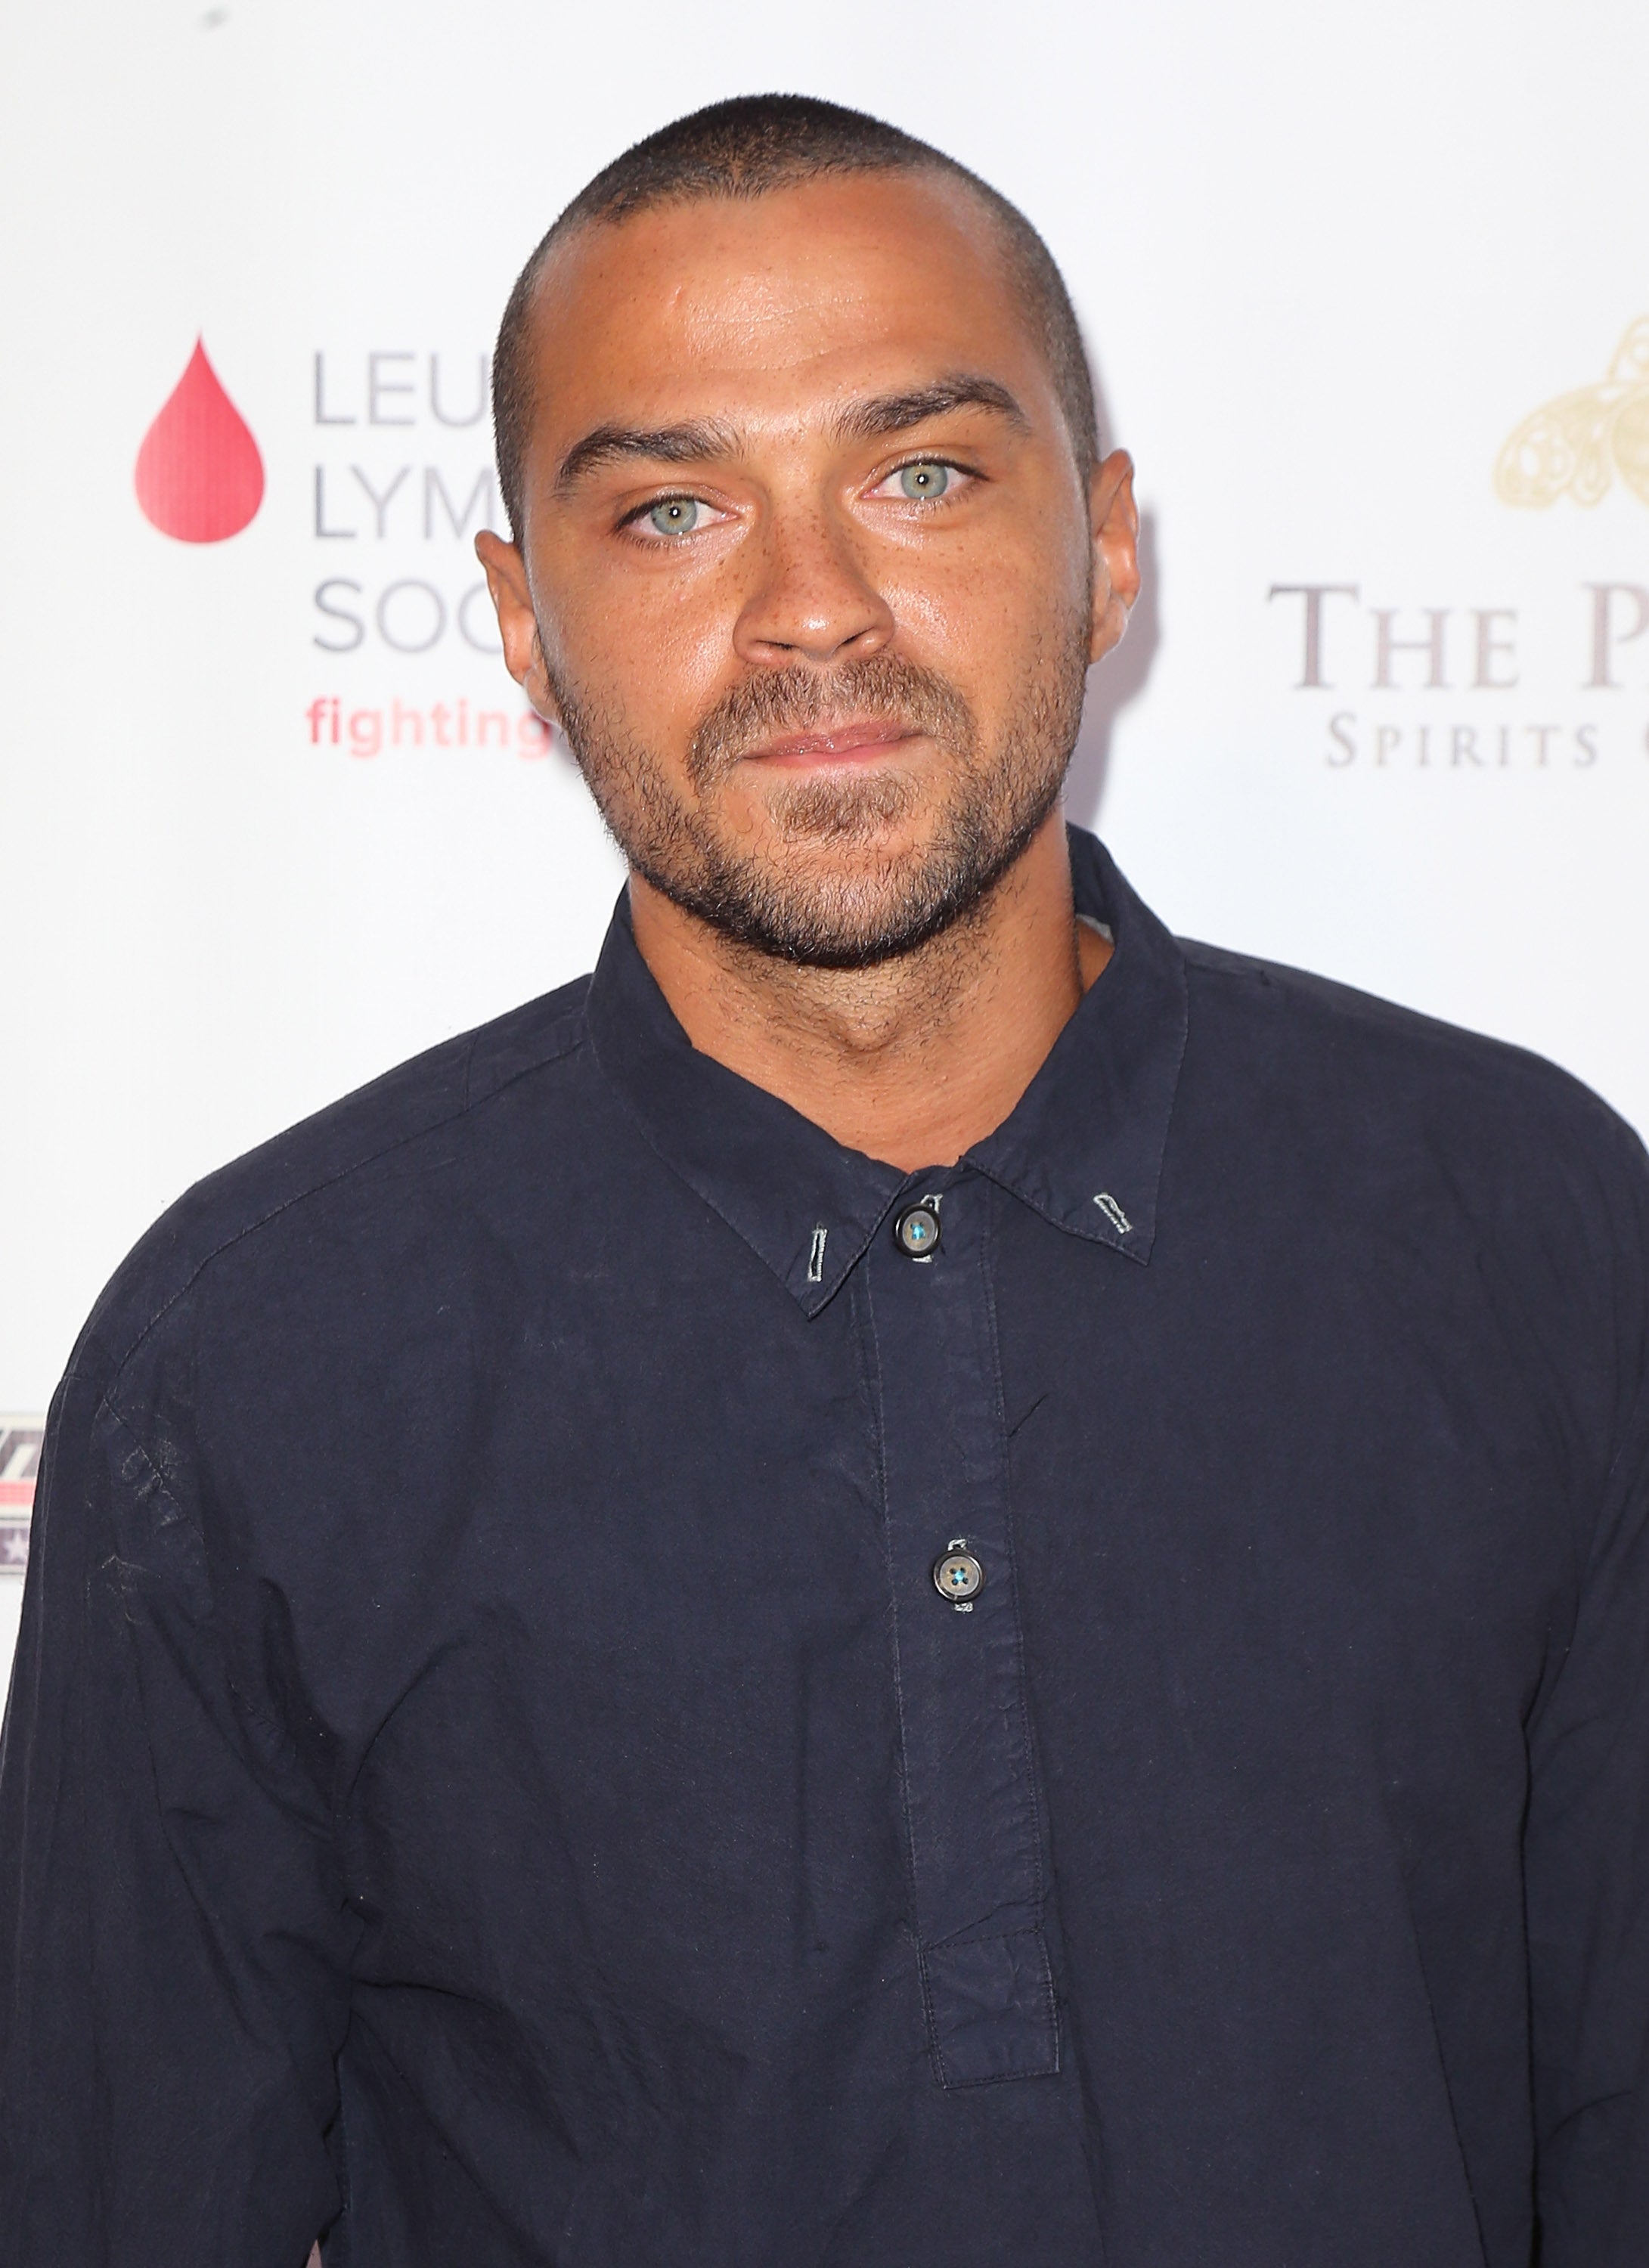 Jesse Williams Takes Us Inside 'Ferguson October' Weekend of Protests
